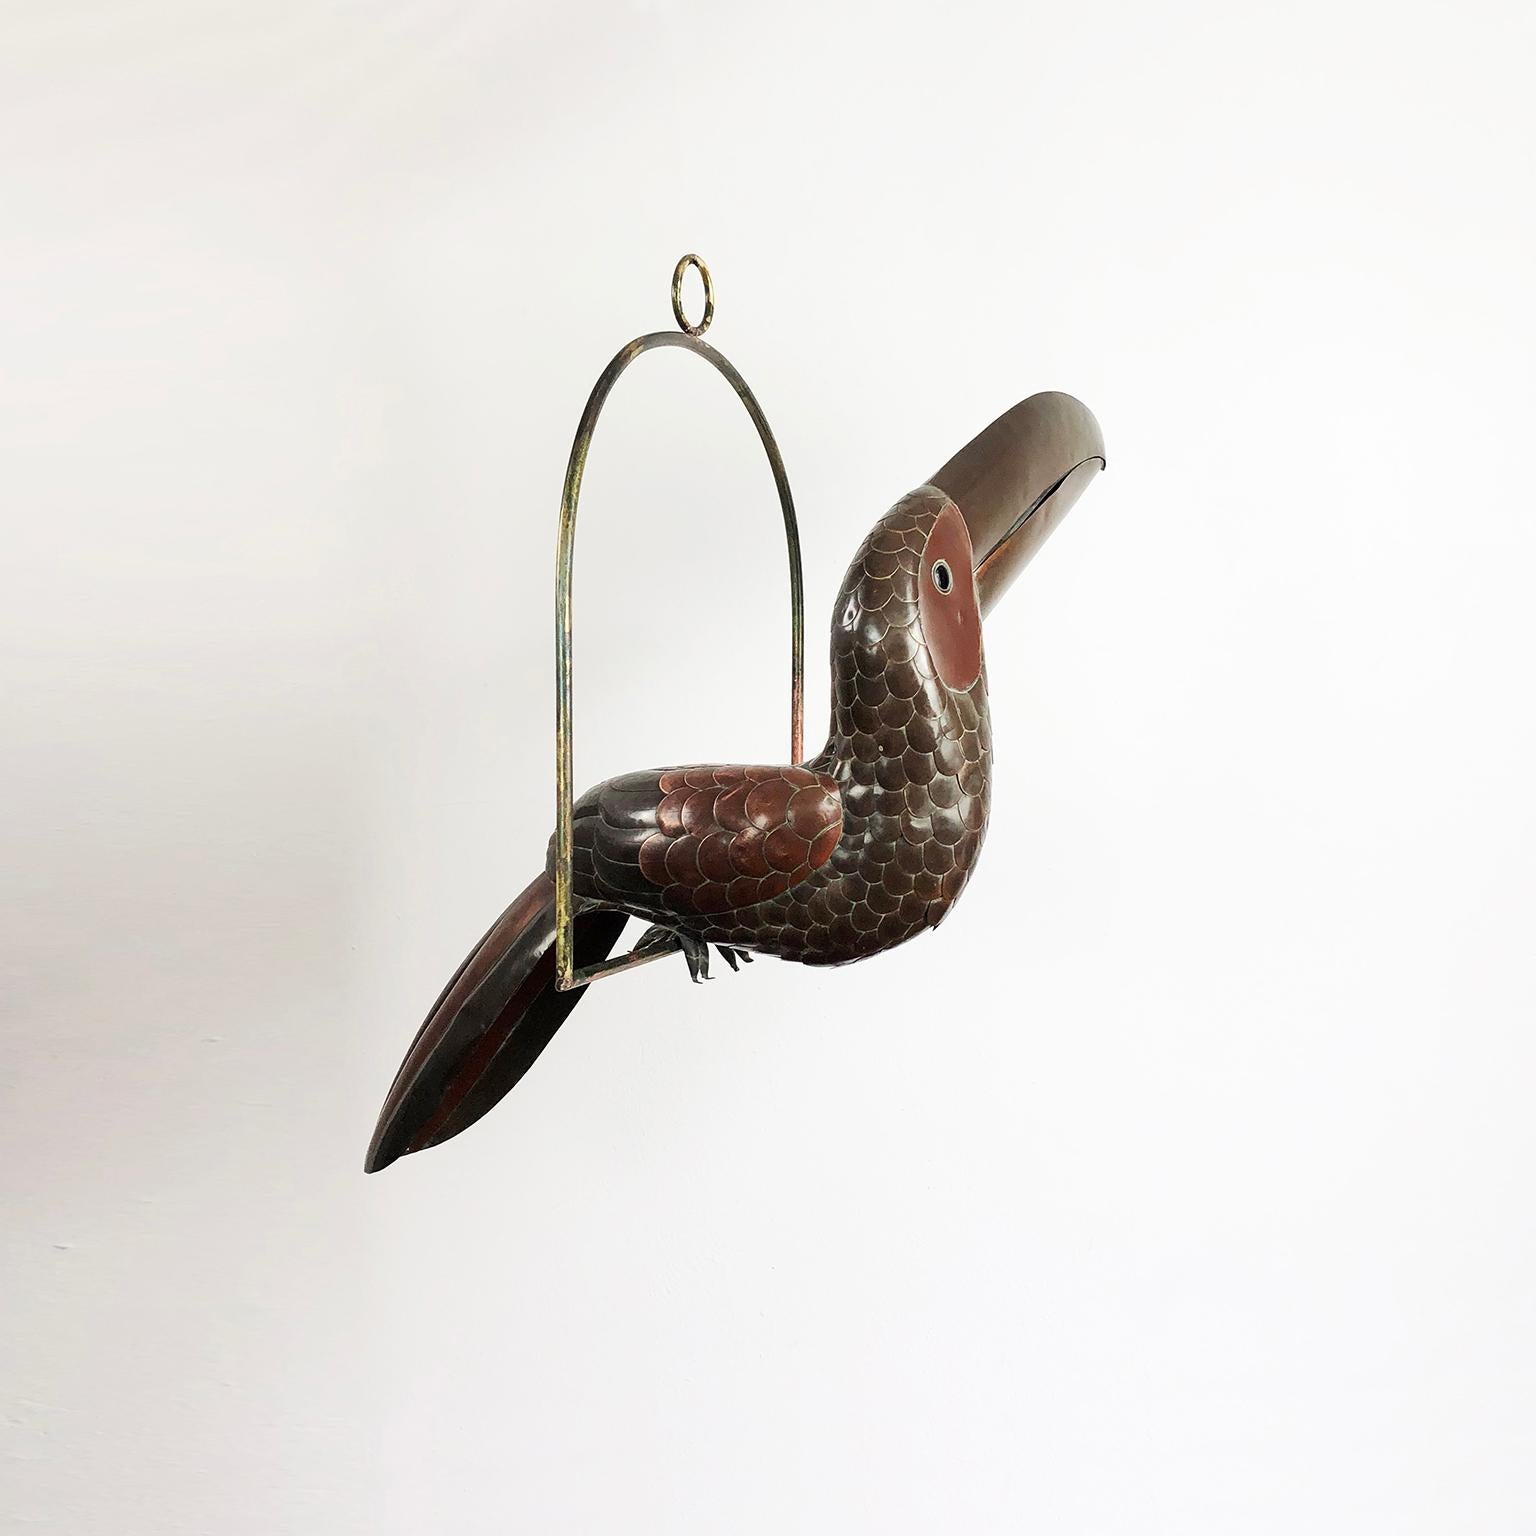 We offer this toucan sculpture by Mexican artist Sergio Bustamante, circa 1960 made in brass and copper with fantastic patina.